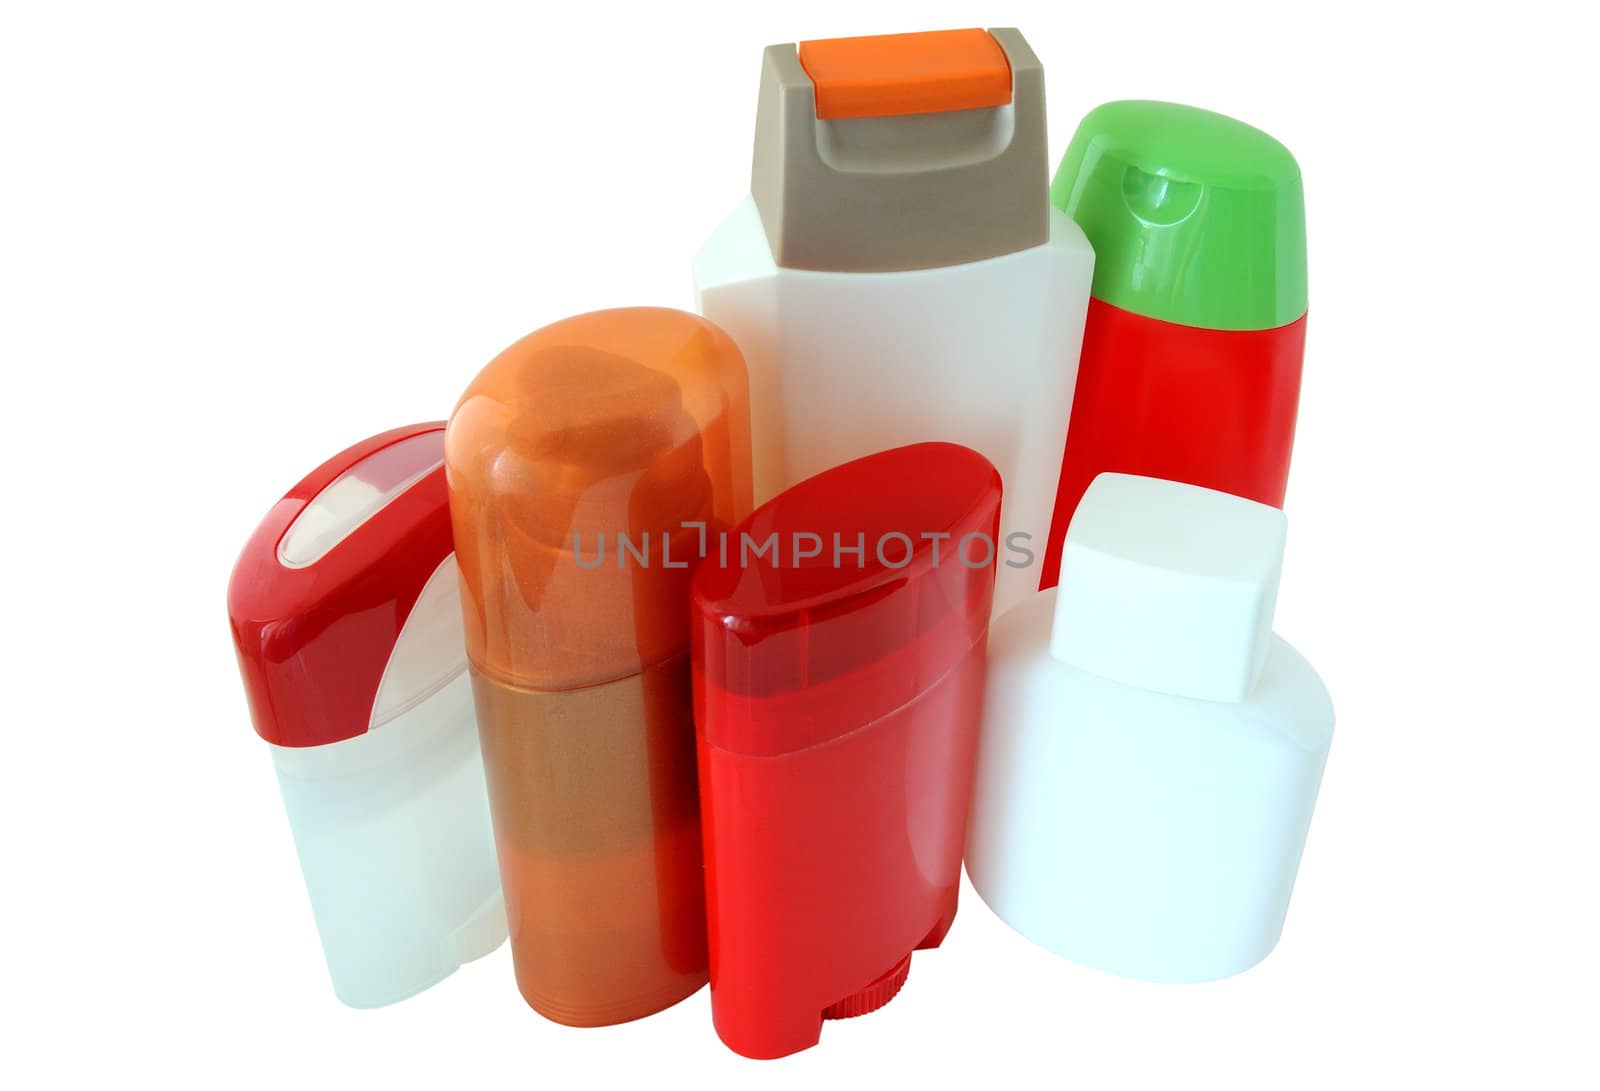 Many different beauty and hygiene products. On isolated background.